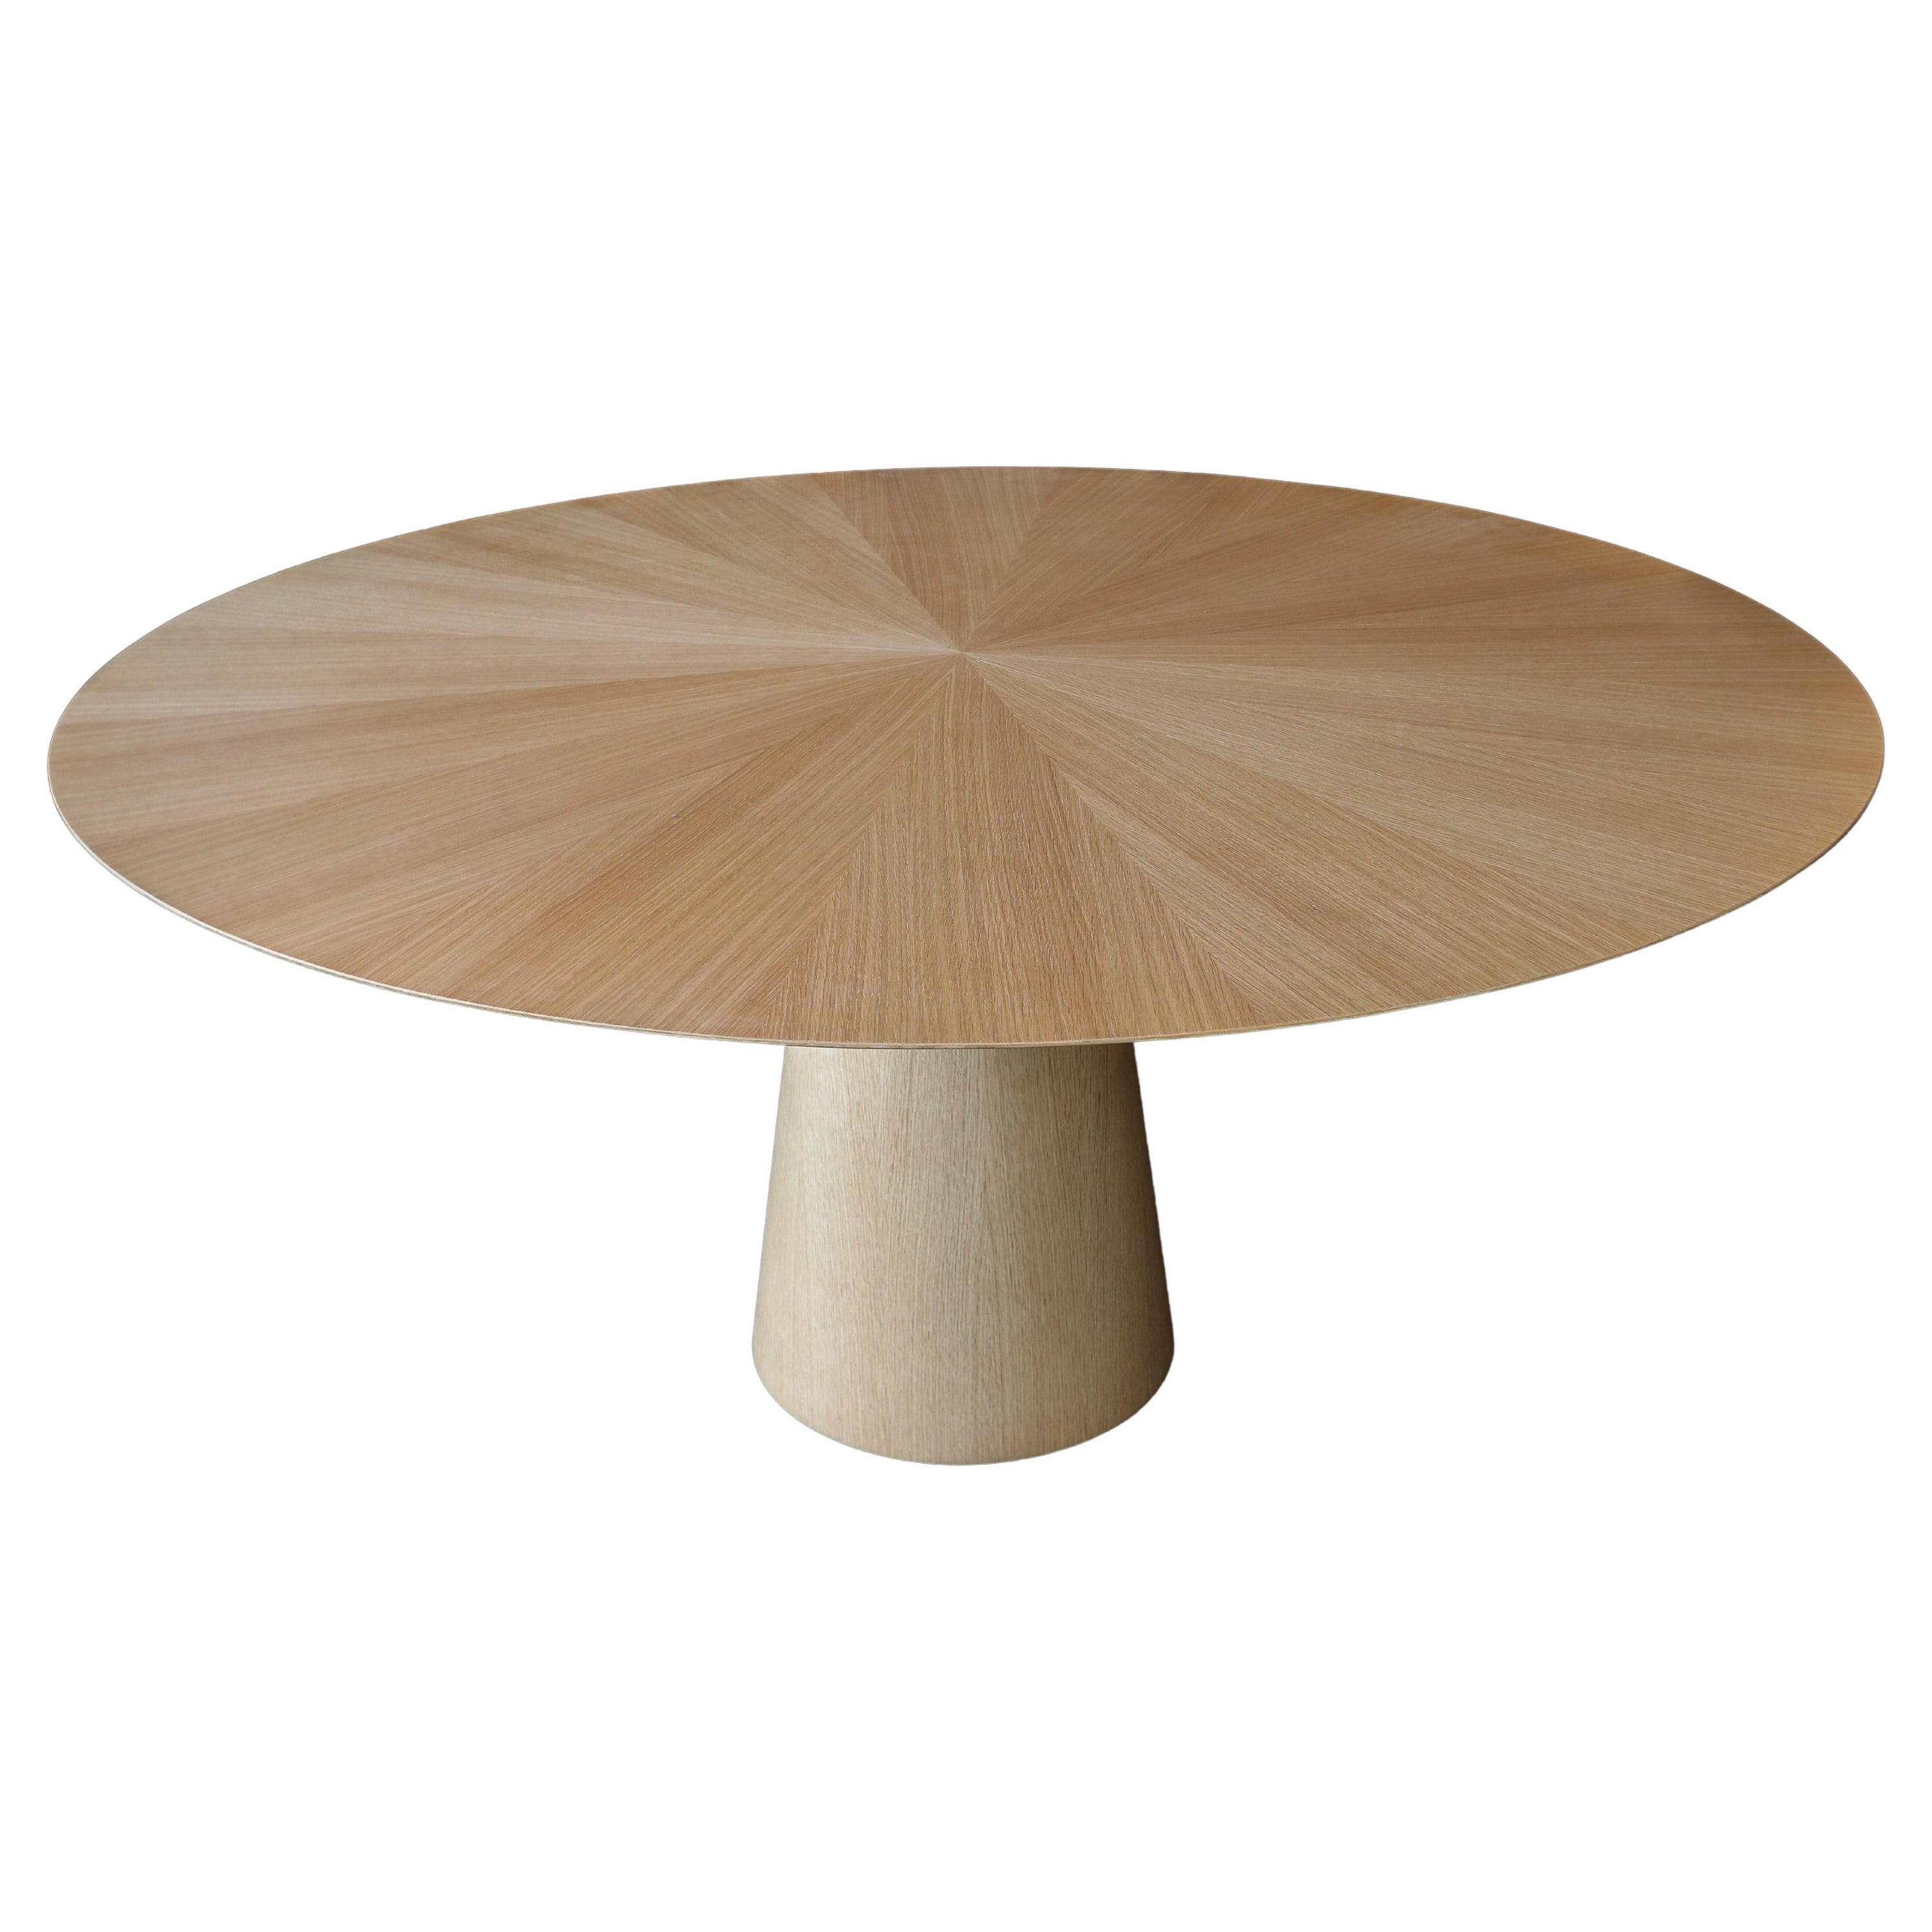 Custom Midcentury Style Round Oak Dining Table with Pedestal Base by Adesso For Sale